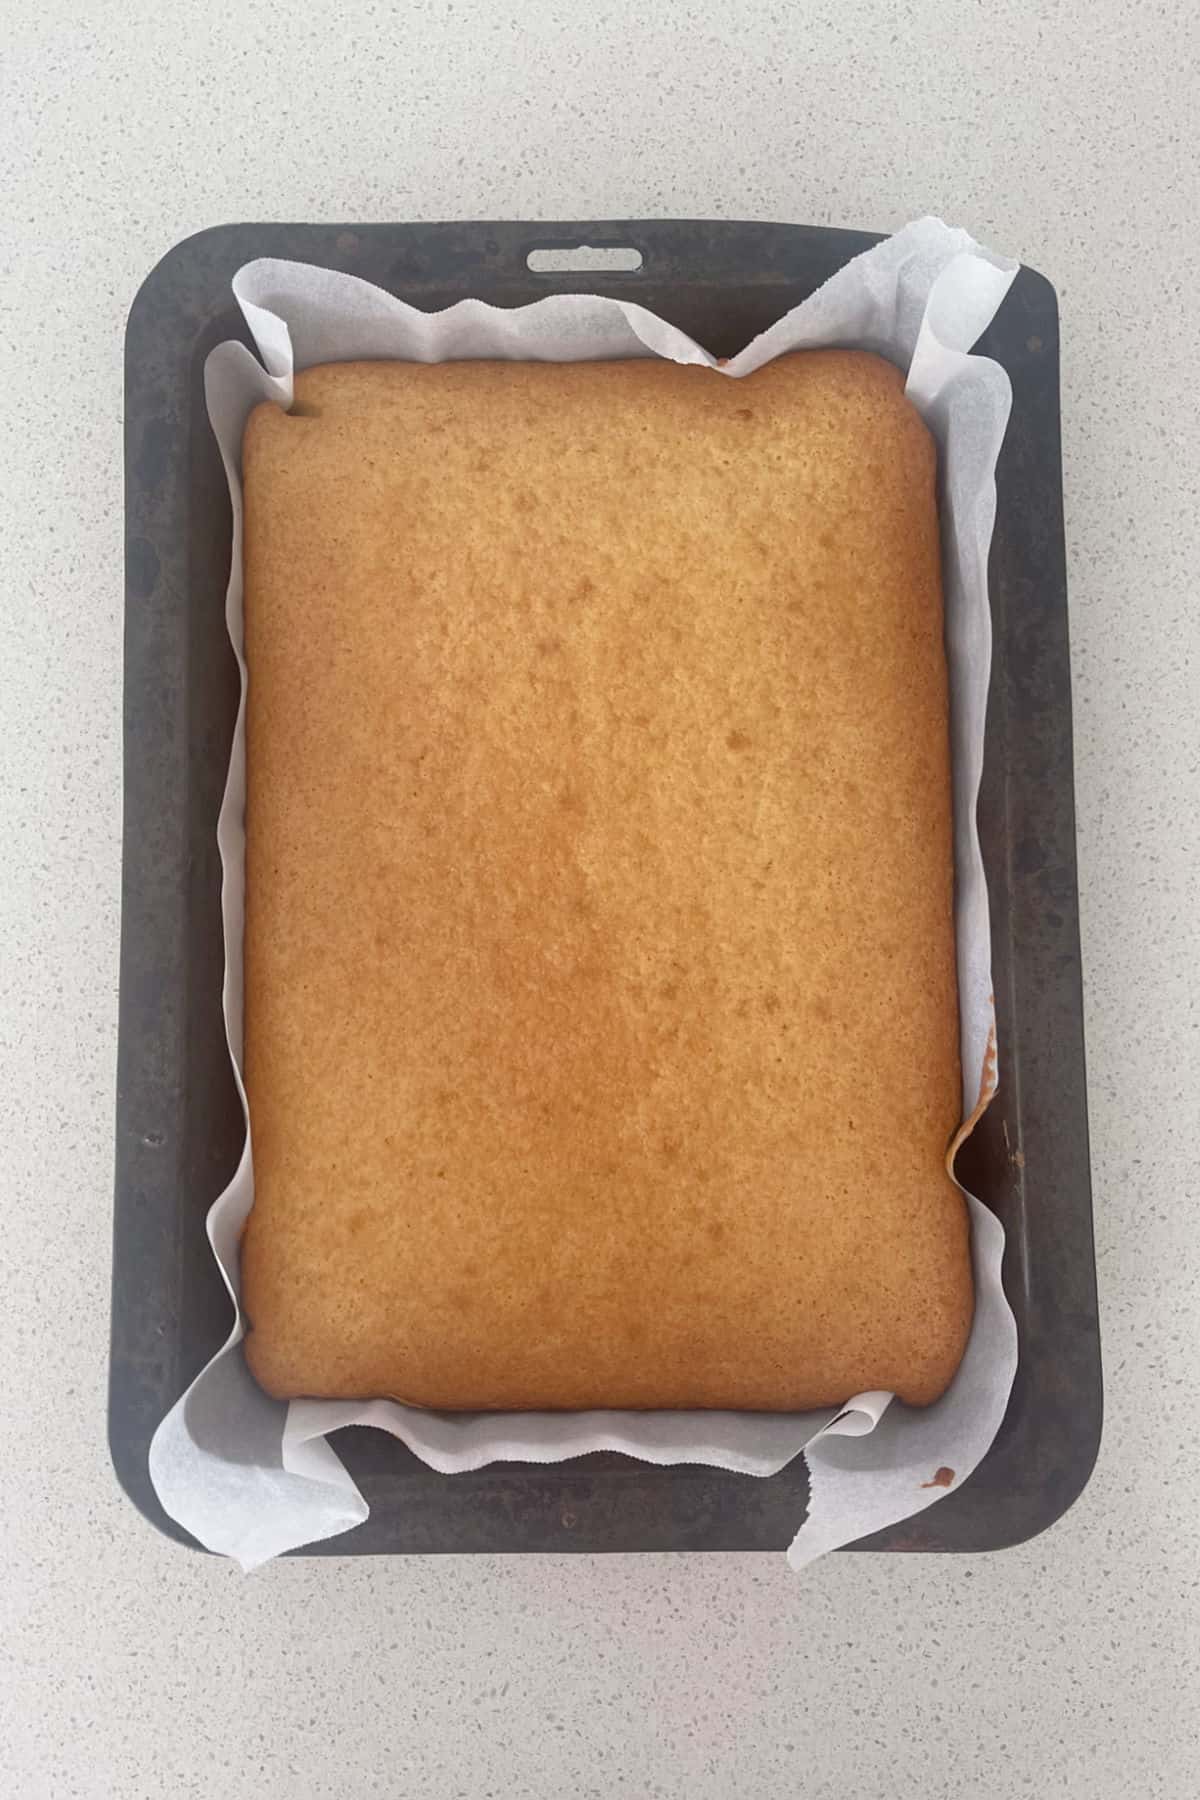 Baked Vanilla Cake in a large baking tray.